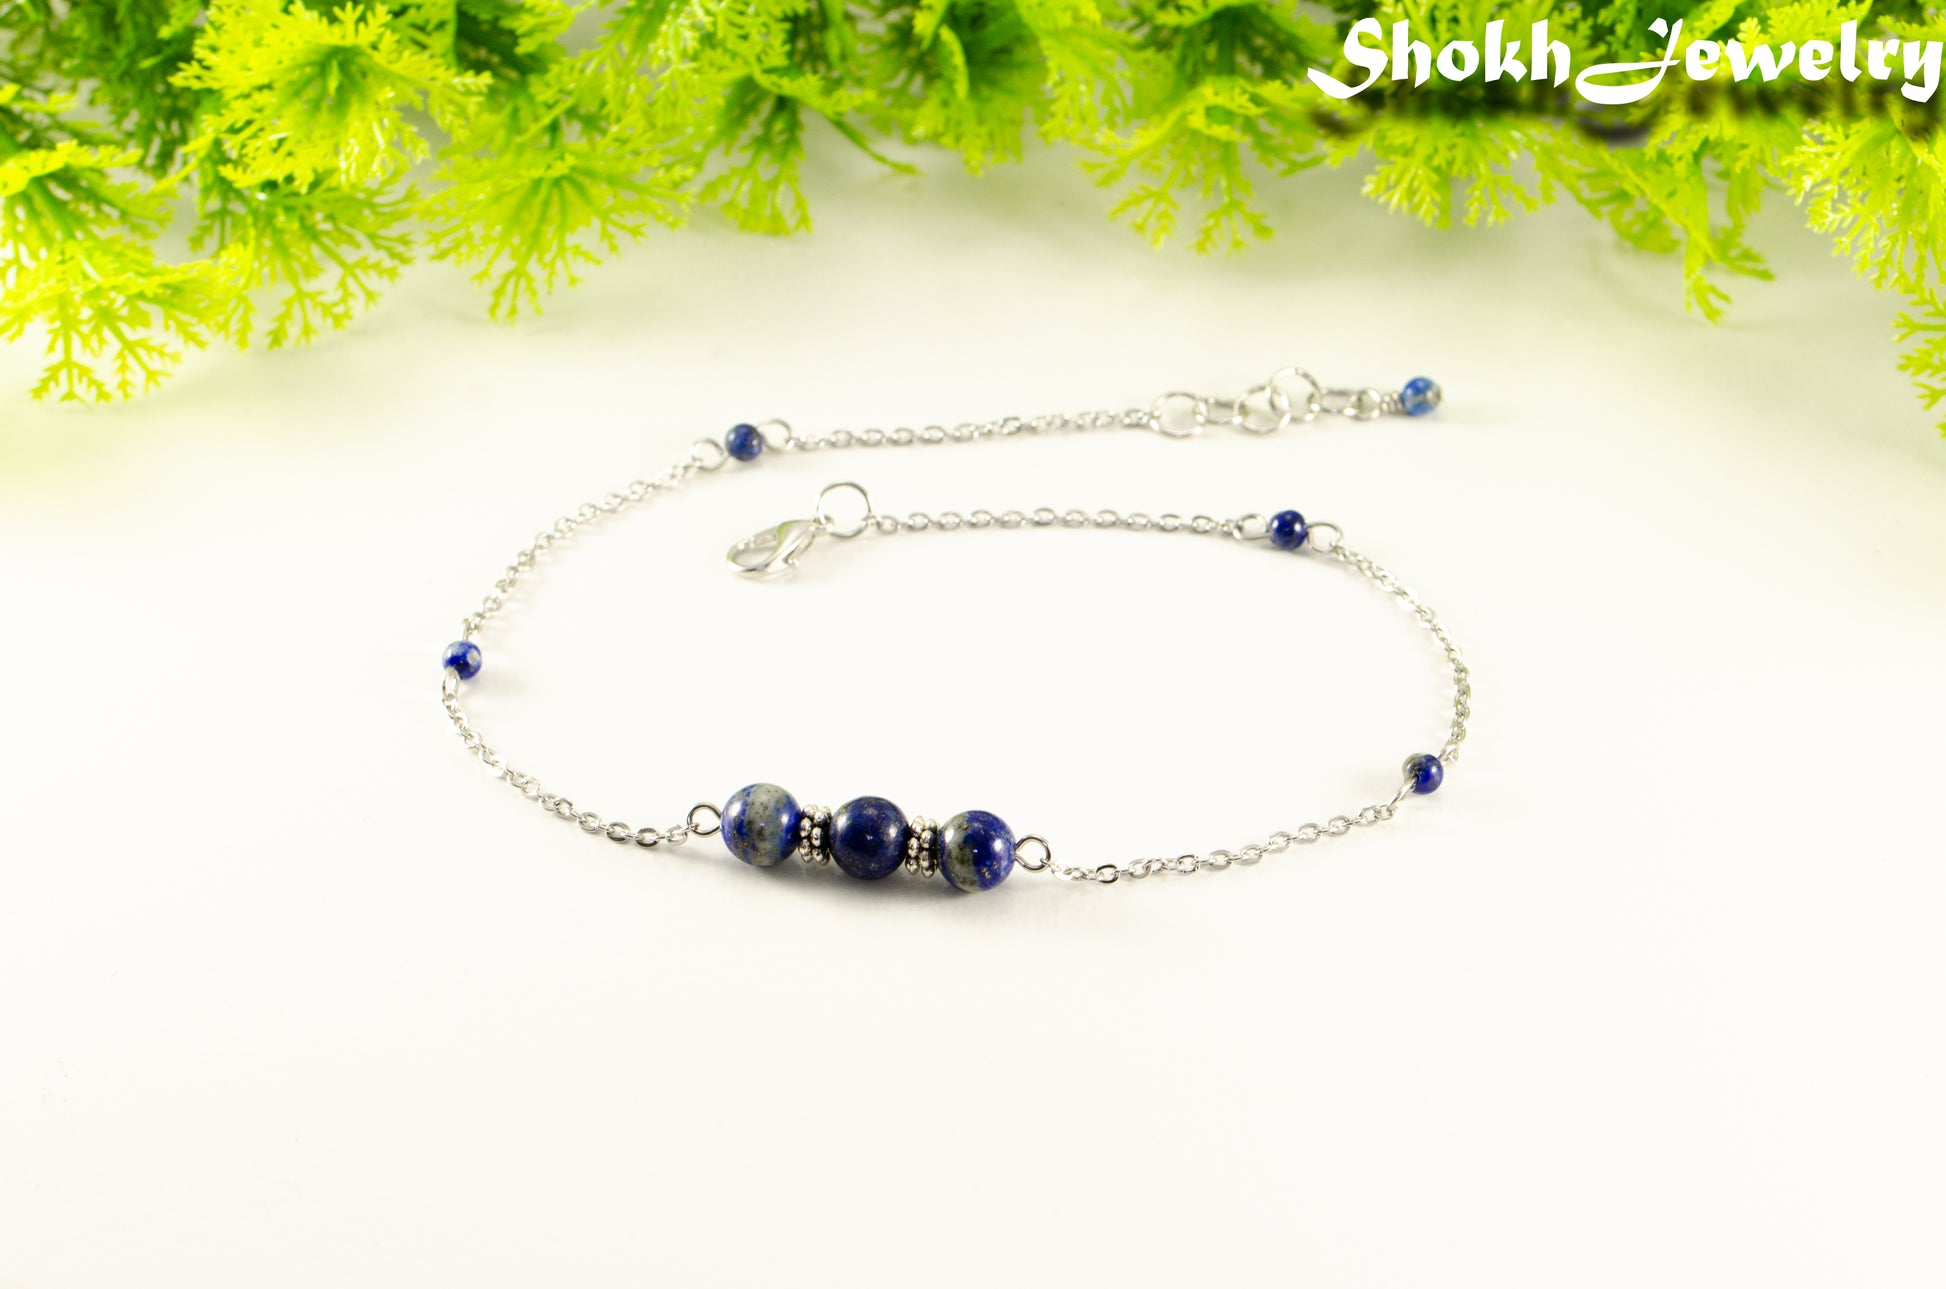 Natural Lapis Lazuli and Chain Choker Necklace for women.